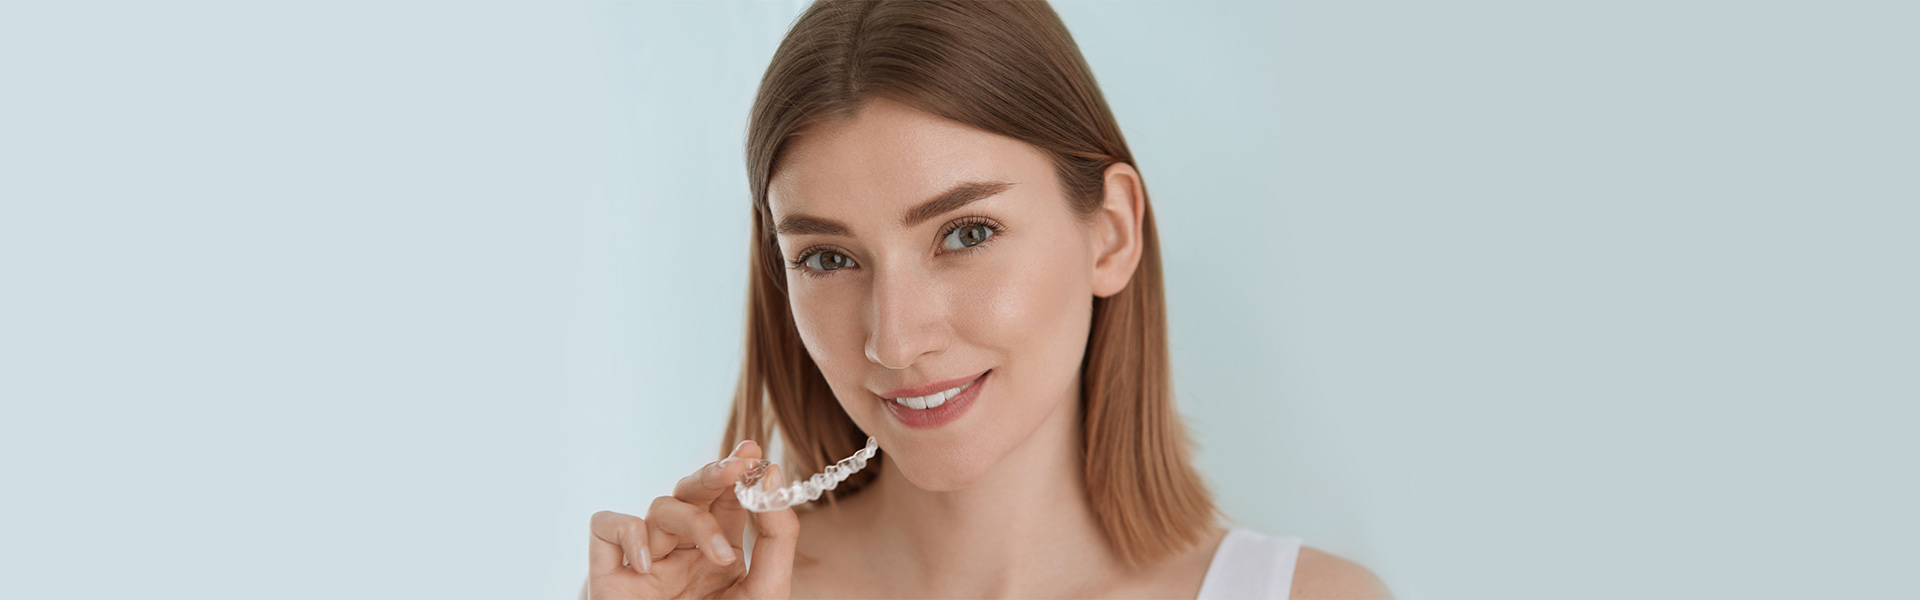 The Ultimate Guide to Invisalign Aligners: Answering 8 Common Questions